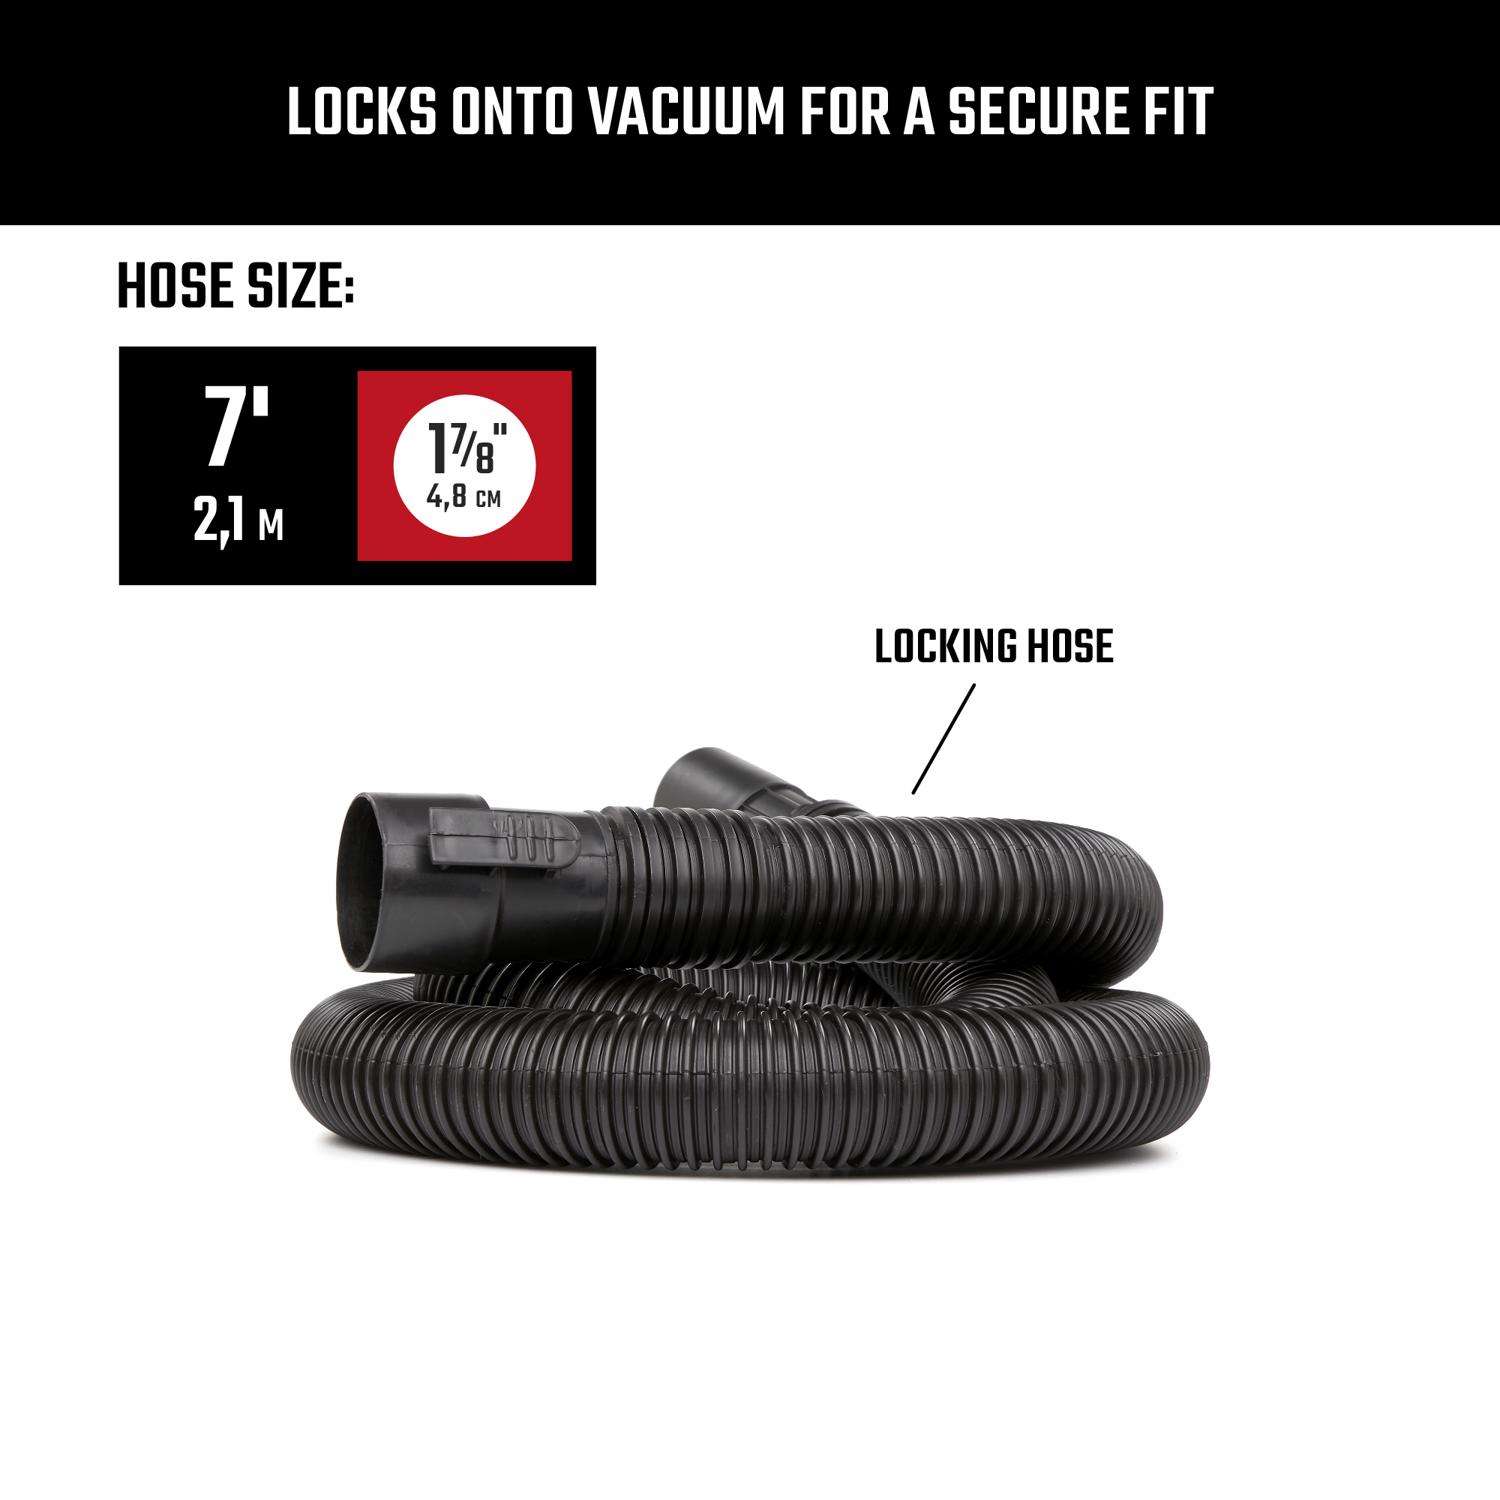 Accessories : Accessories and bags - Central vacuum hose with gas…